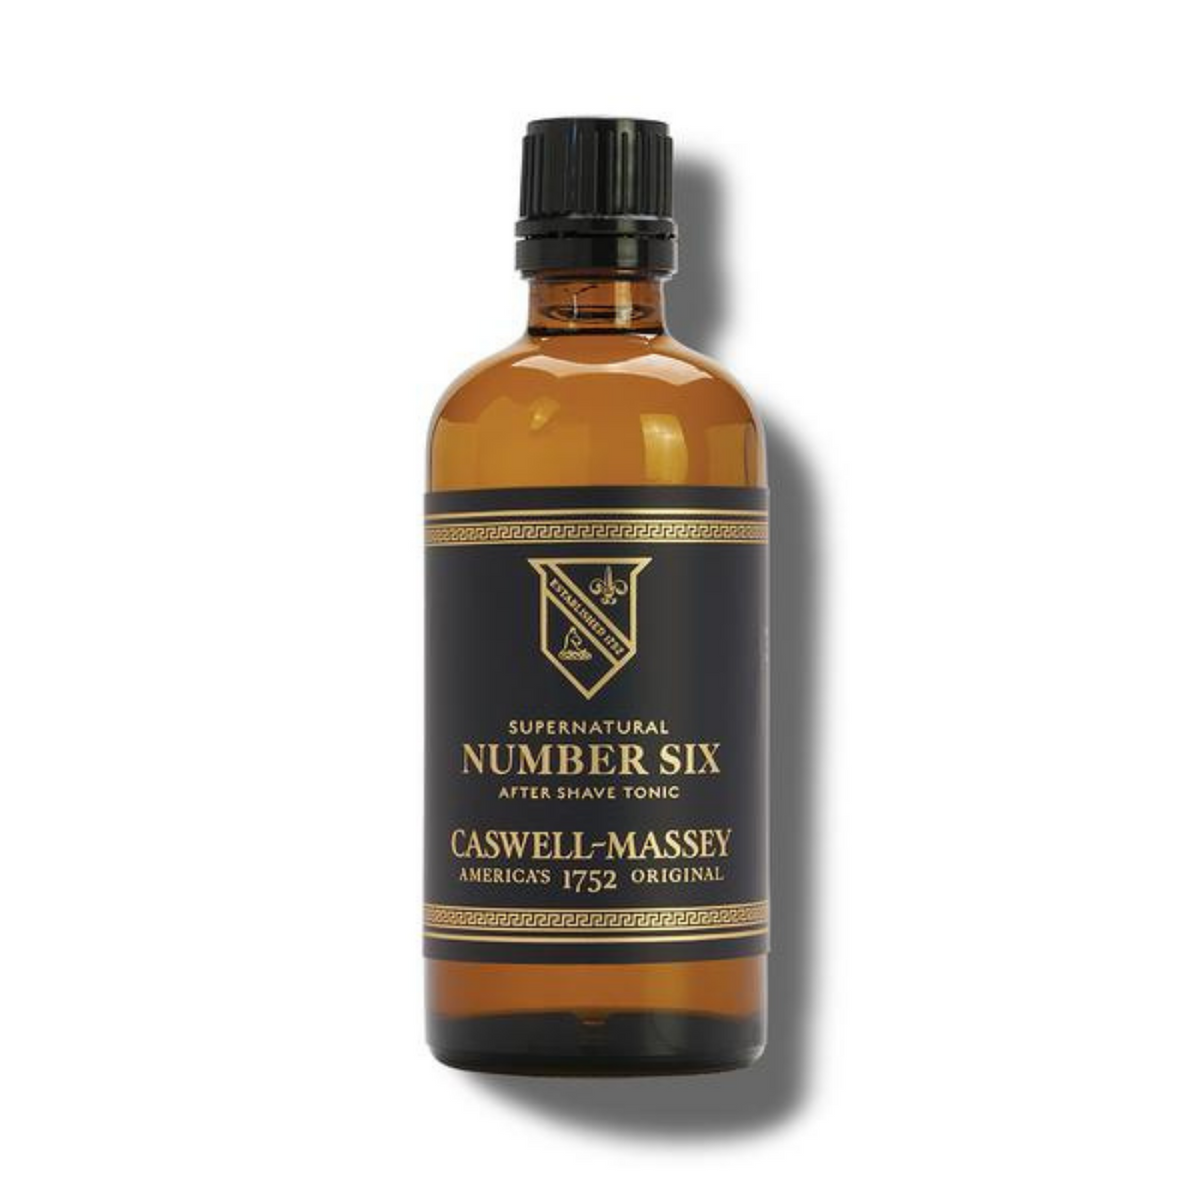 Primary Image of Number Six After Shave Tonic